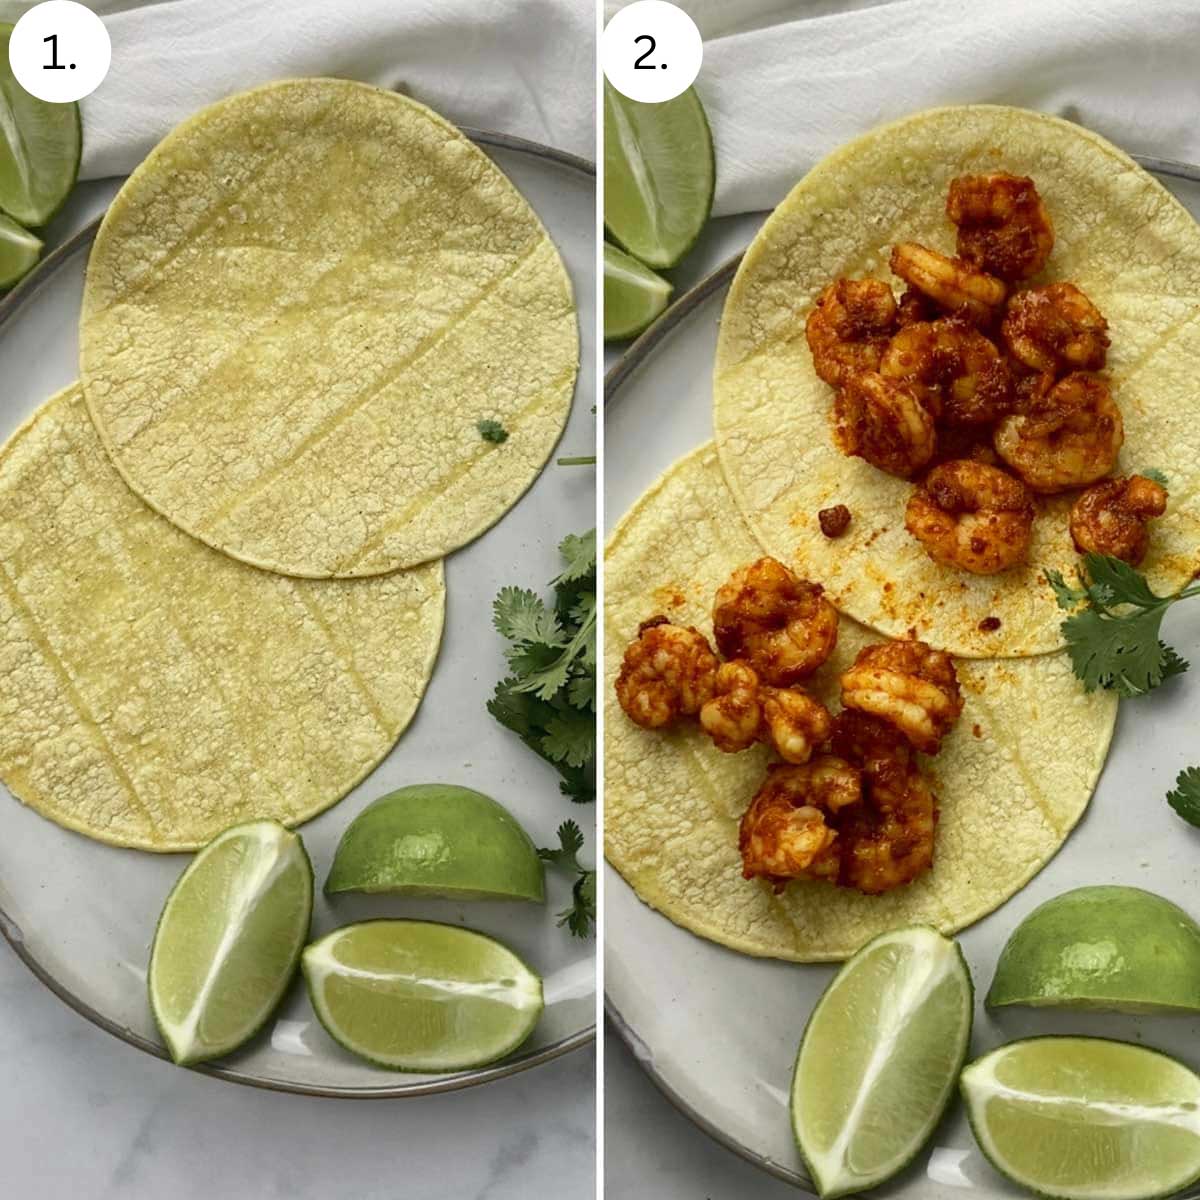 2 process shots on how to assemble the tacos